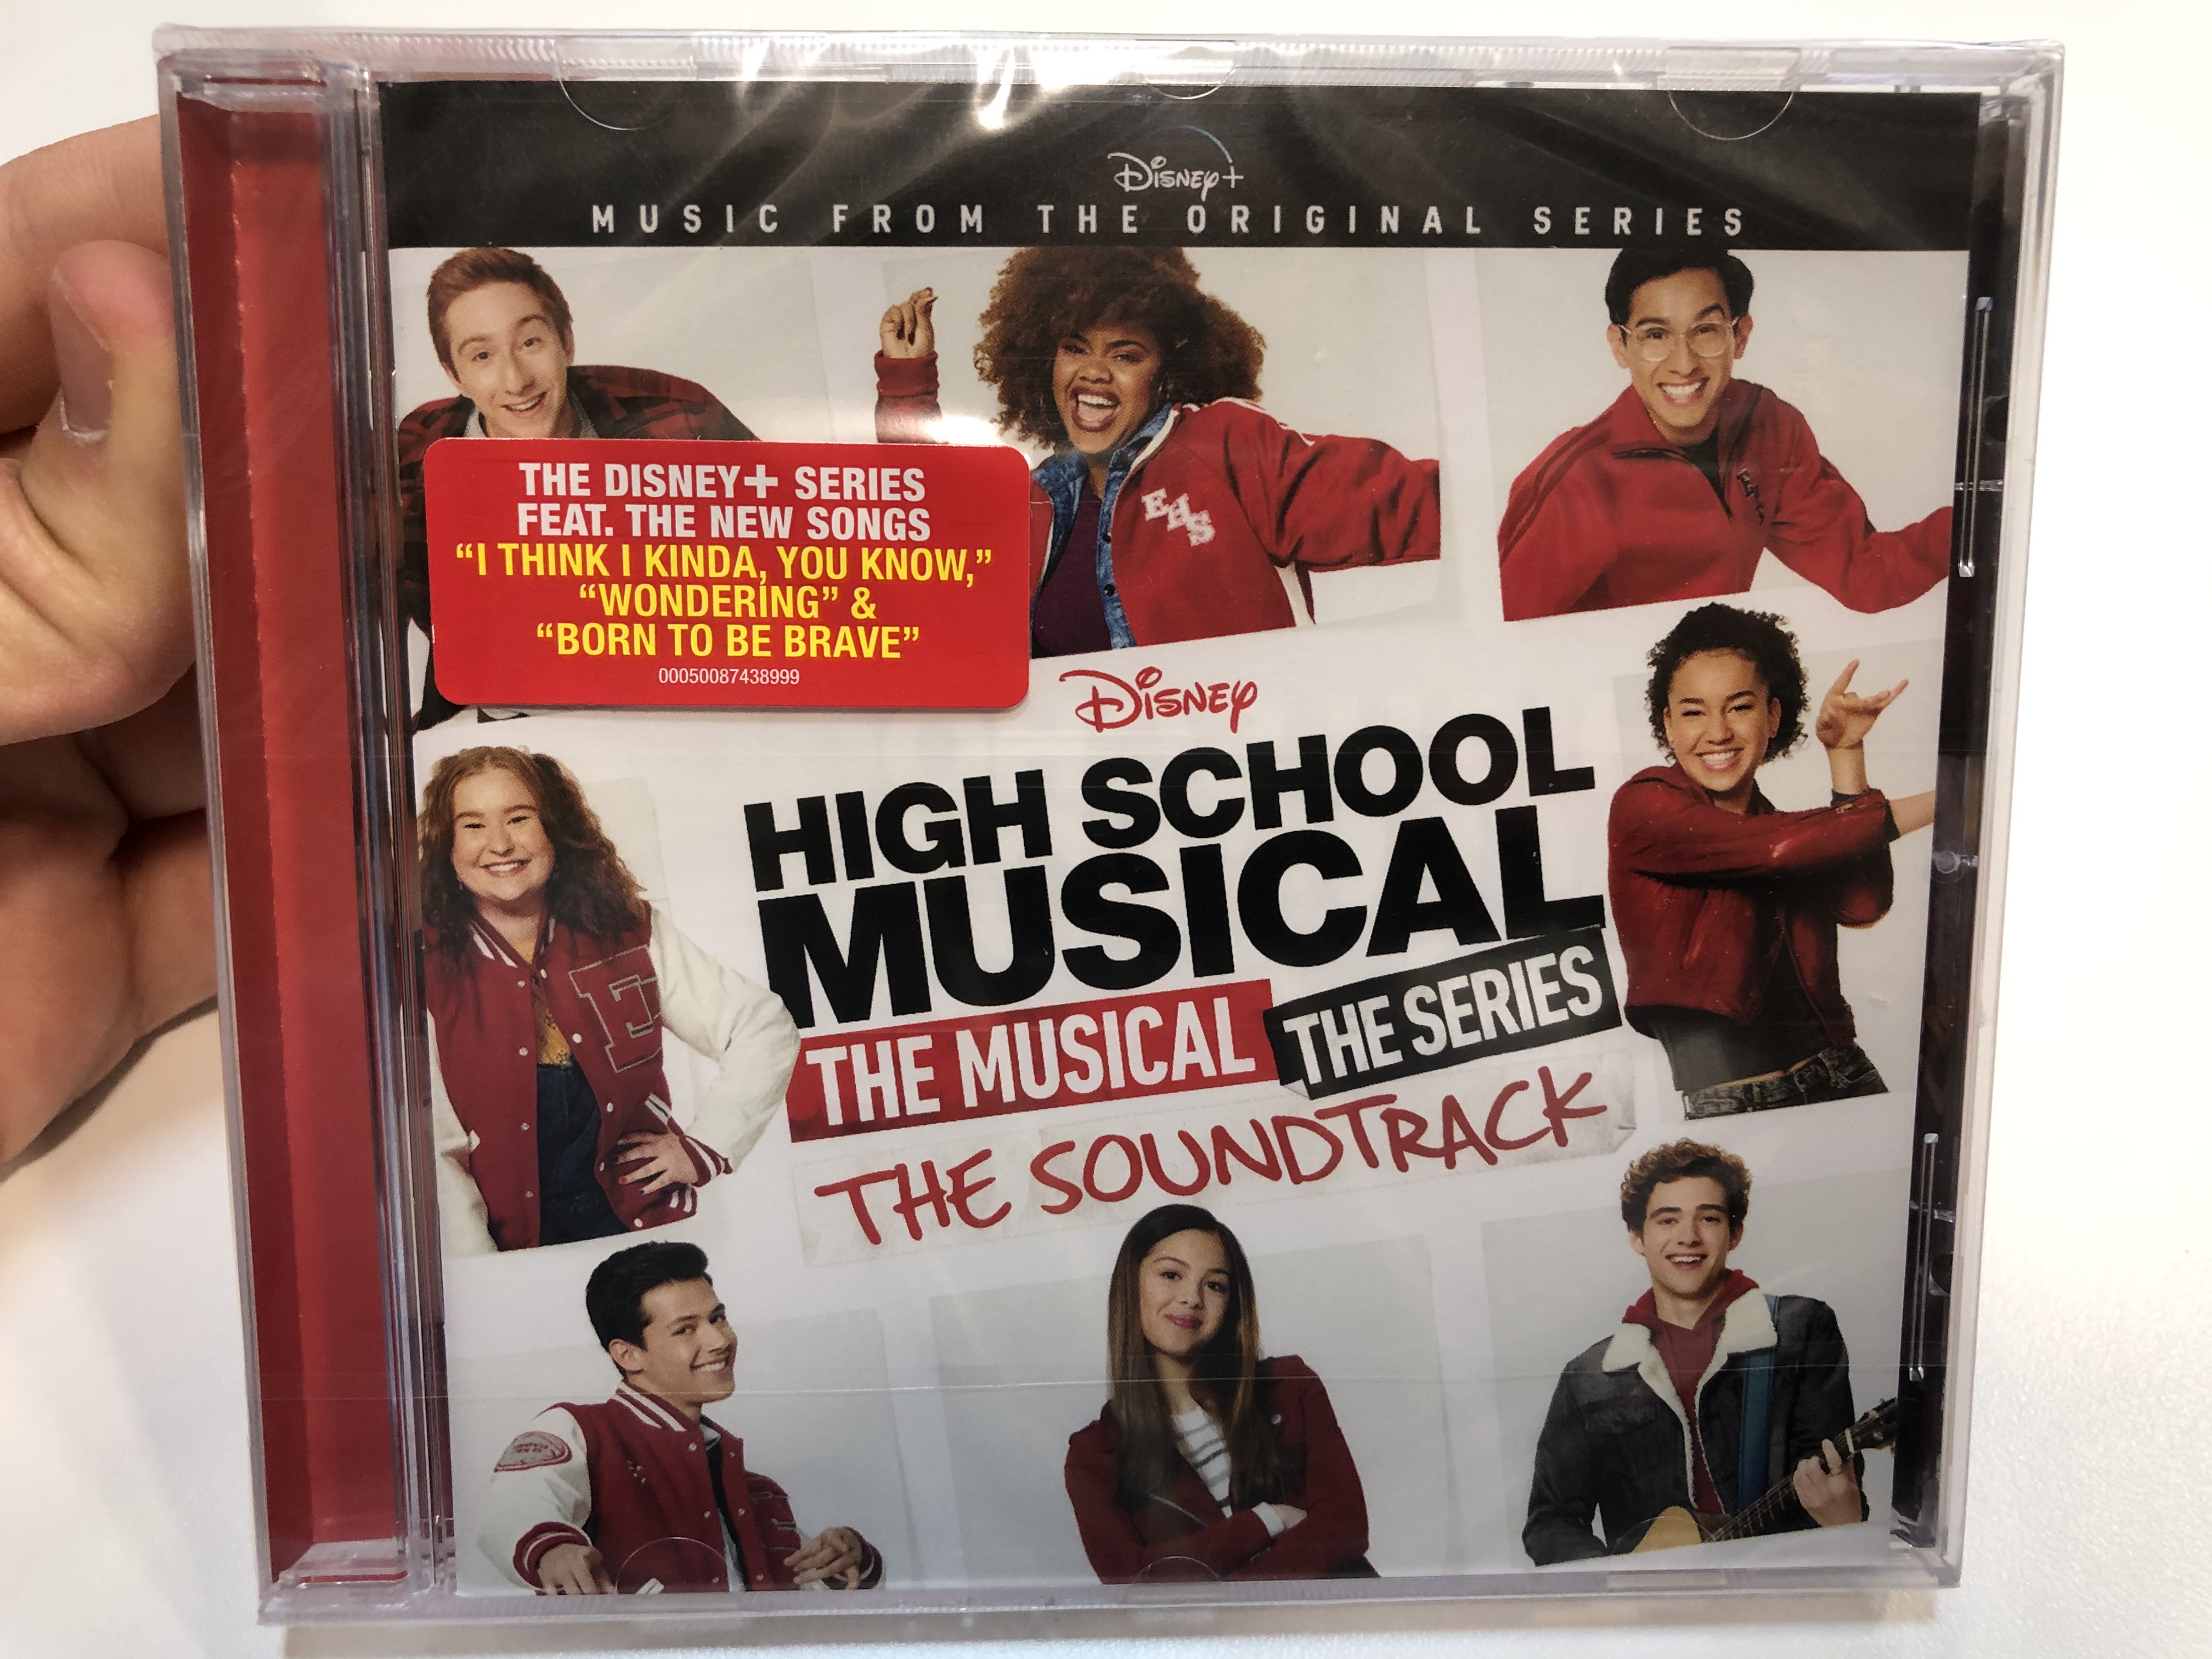 The Disney Channel Original movie 'High School Musical', reviewed 